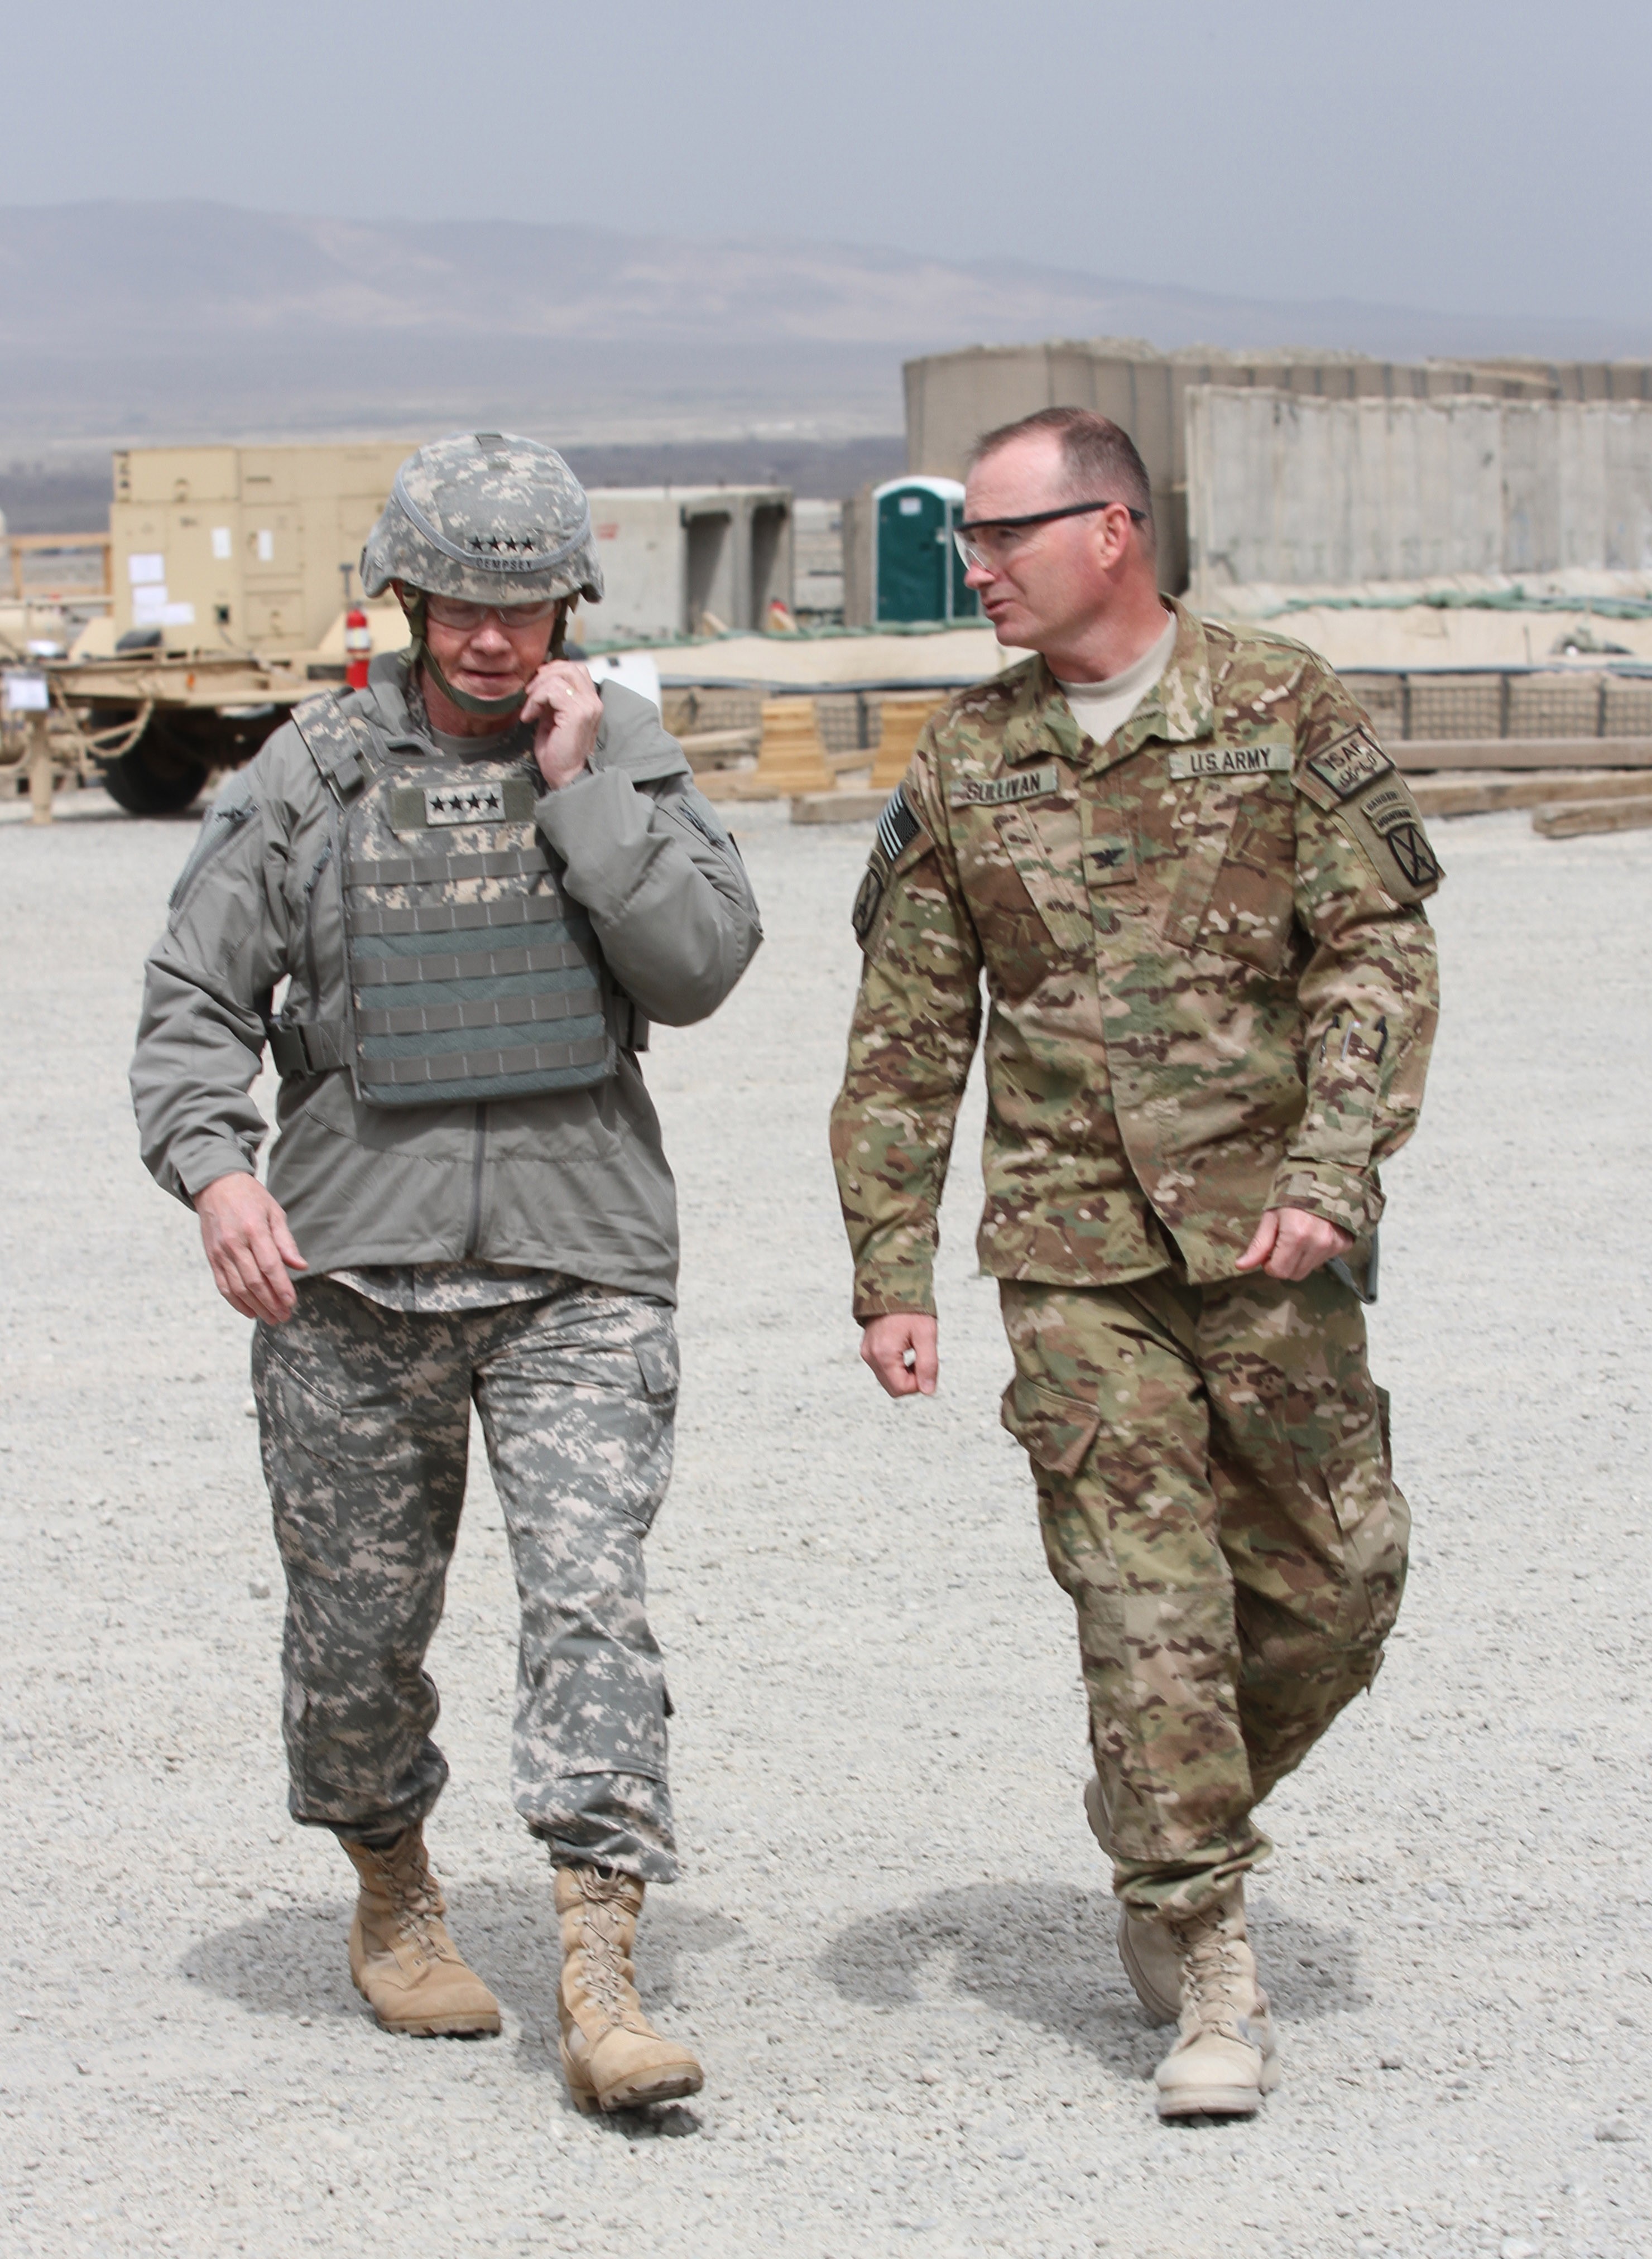 Chairman of Joint Chiefs visits 'Commando Brigade' in Afghanistan ...